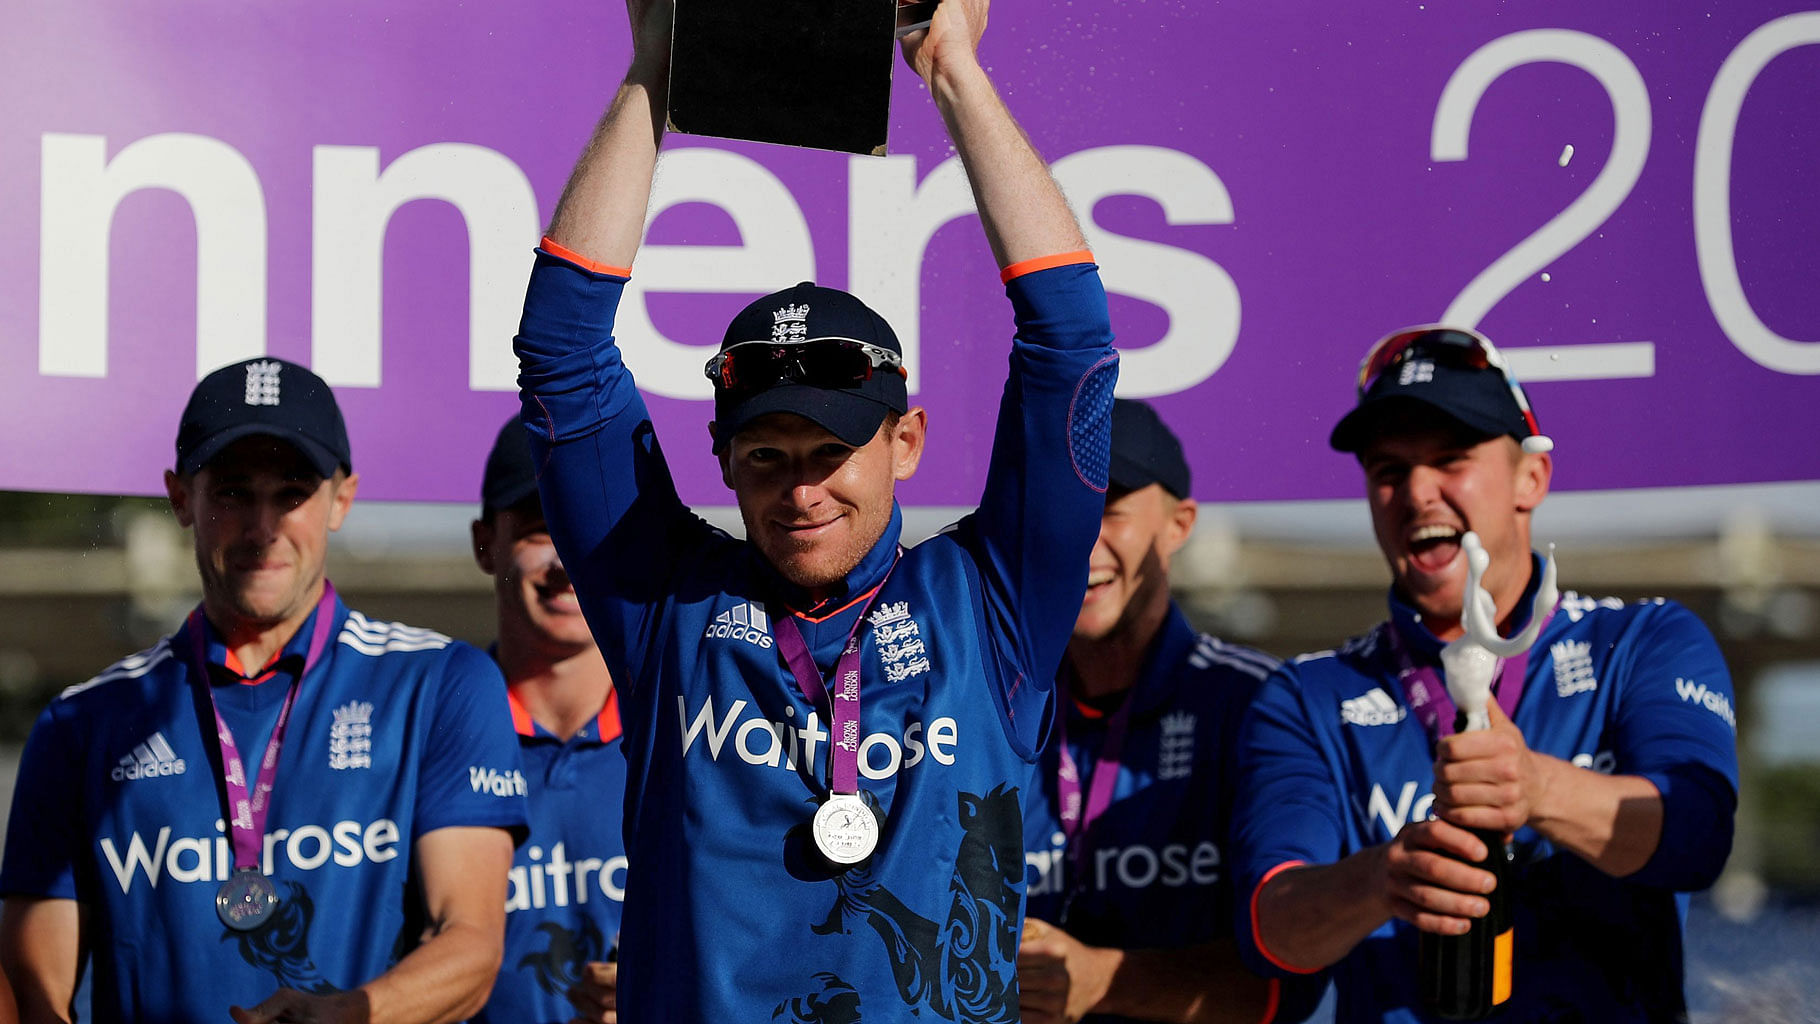 England’s captain Eoin Morgan, center, lifts the Royal London One Day series trophy. (Photo: AP)